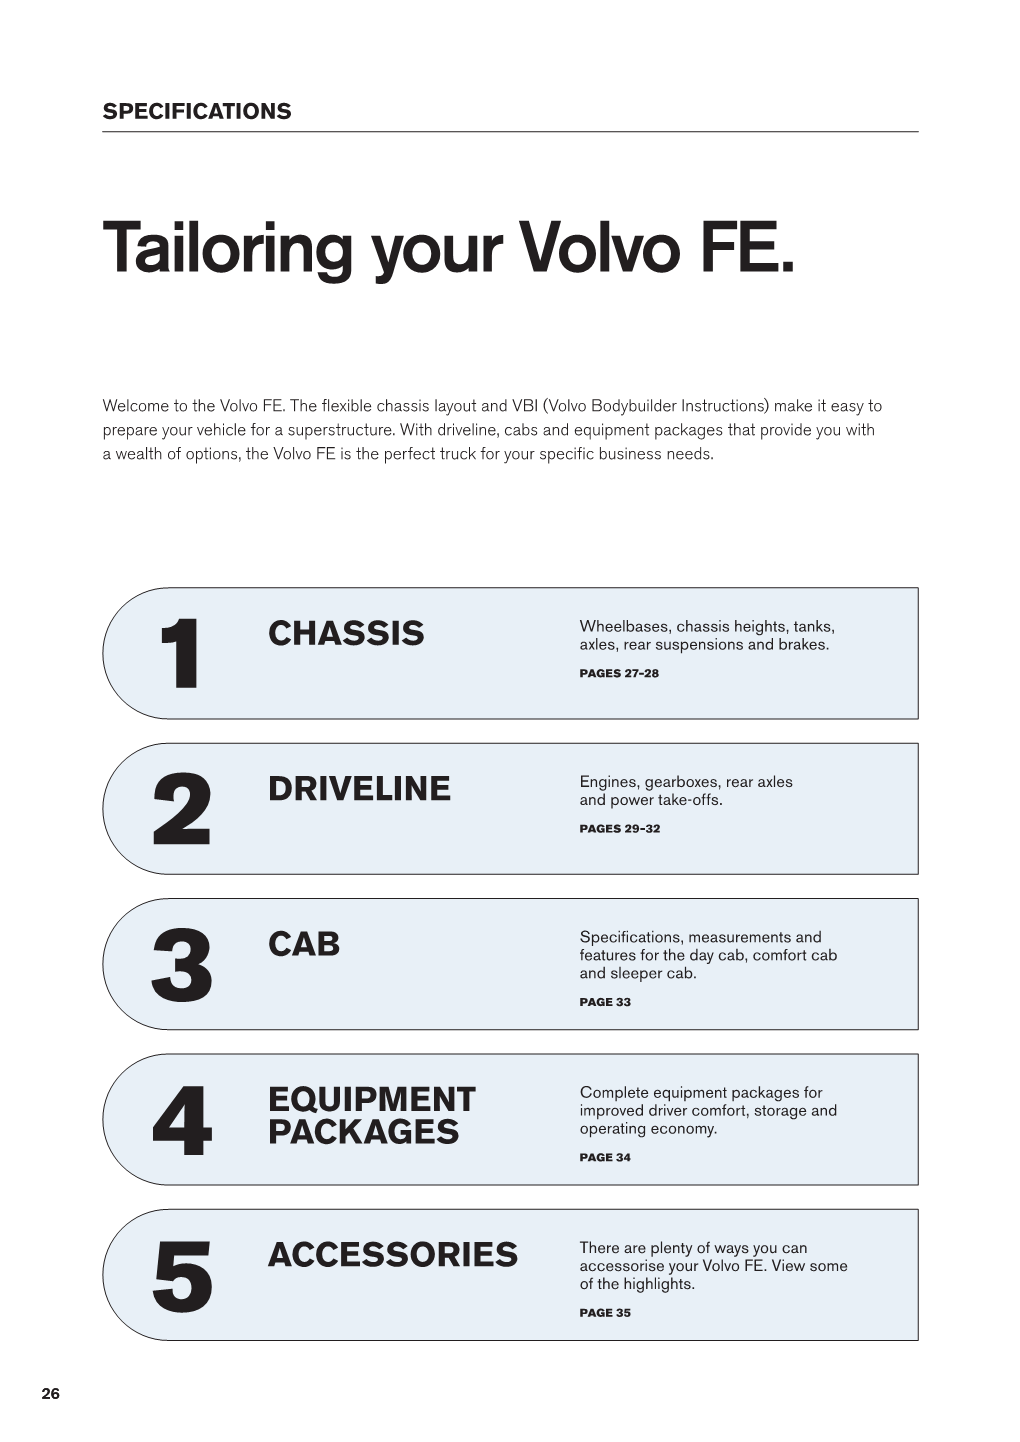 Volvo FE, Specifications